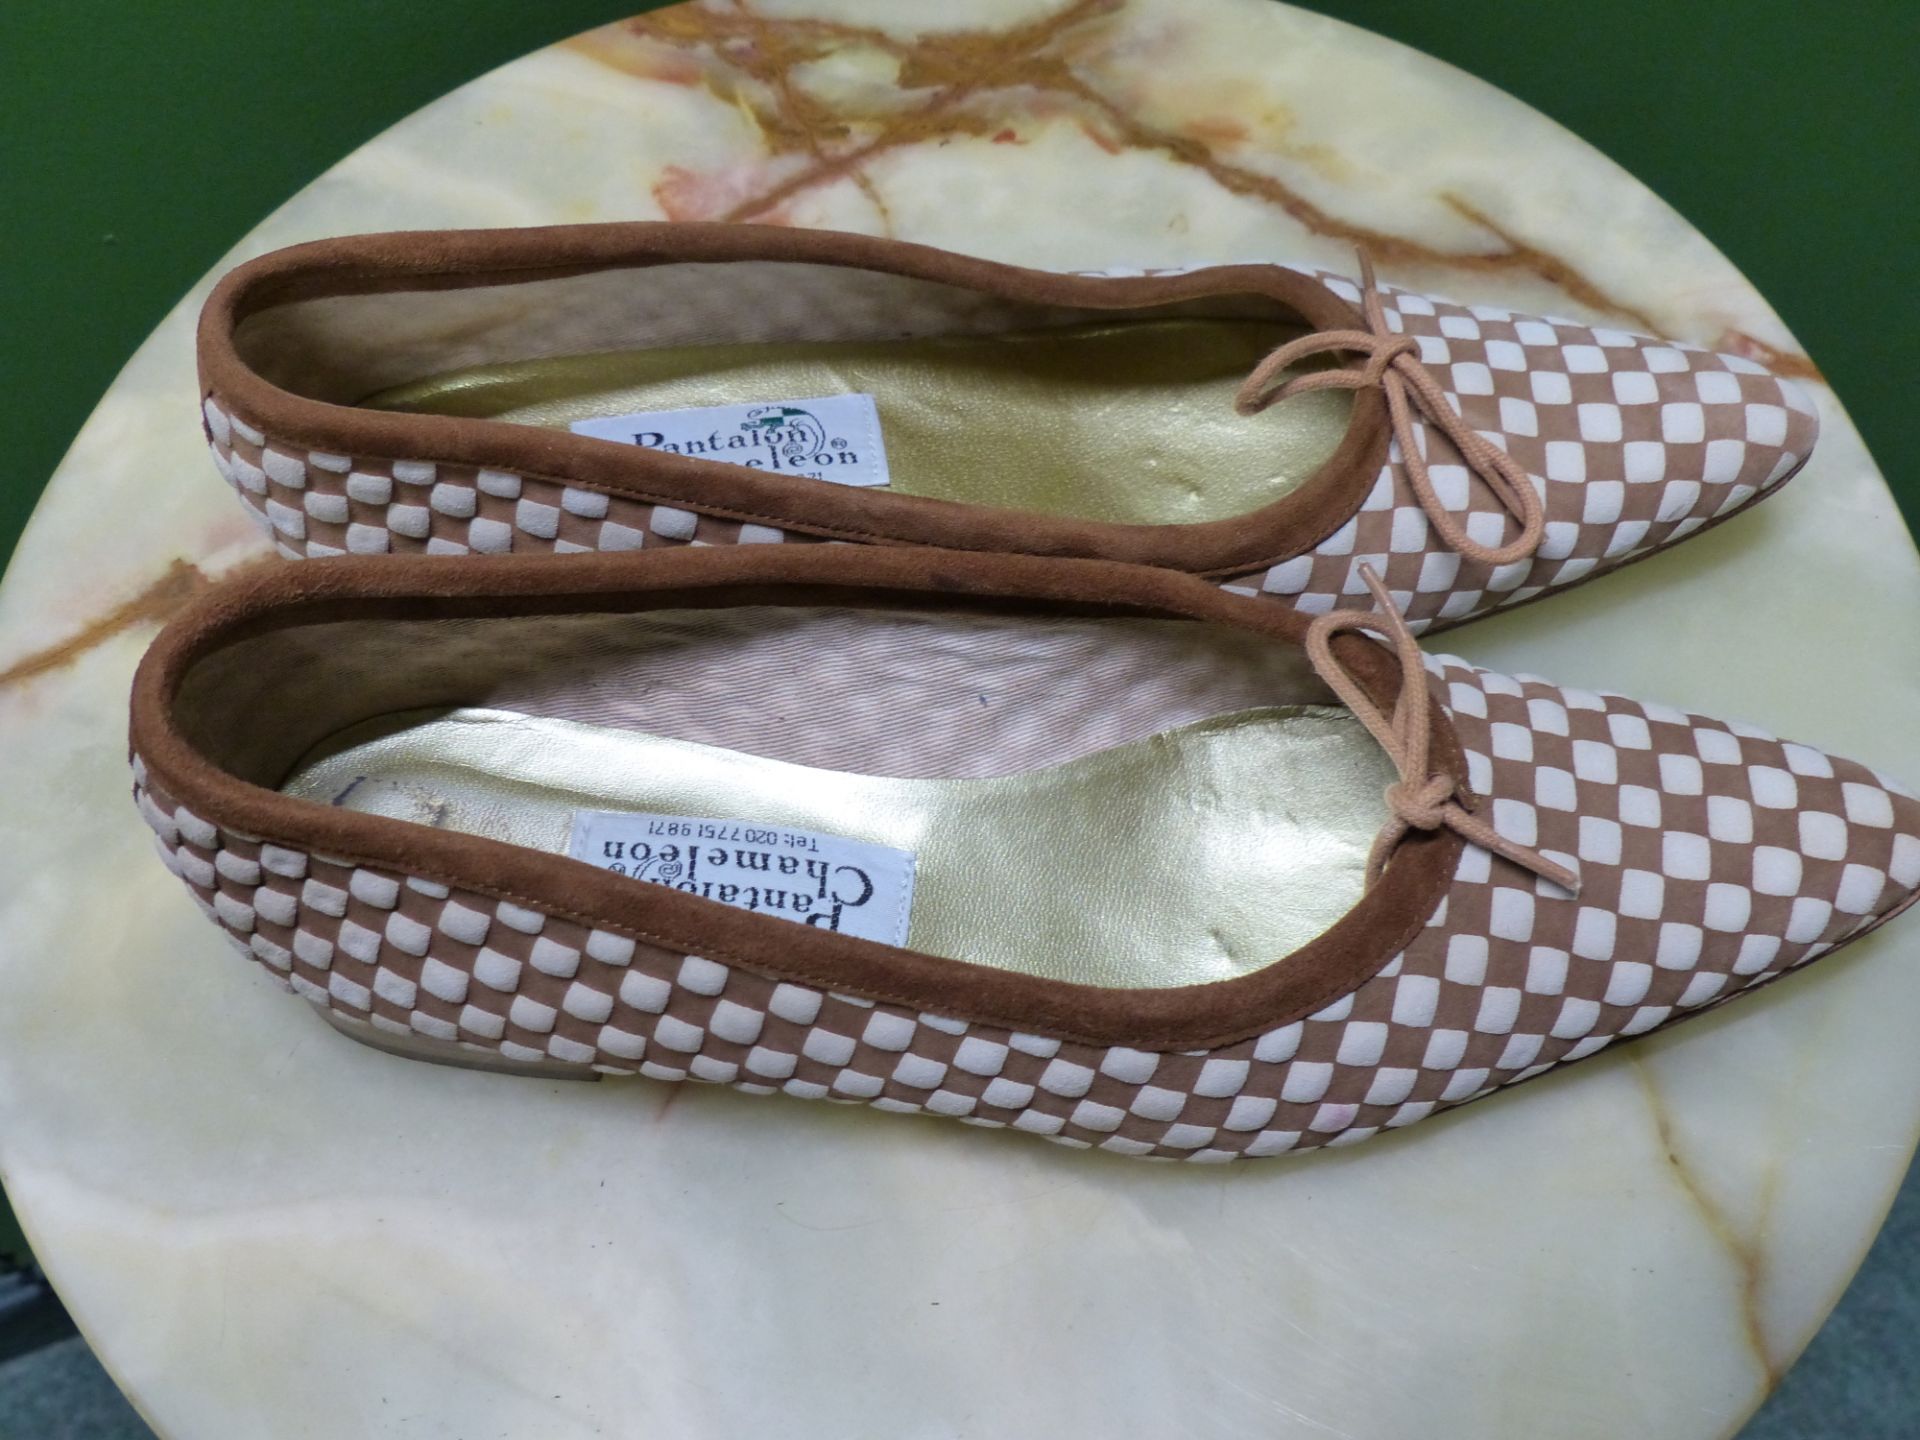 SHOES. TWO PAIRS PANTALON CHAMELEON FRENCH SIZE EUR 40 TAN AND BEIGE SUEDE SLIP ON'S, AND CREAM - Image 2 of 9